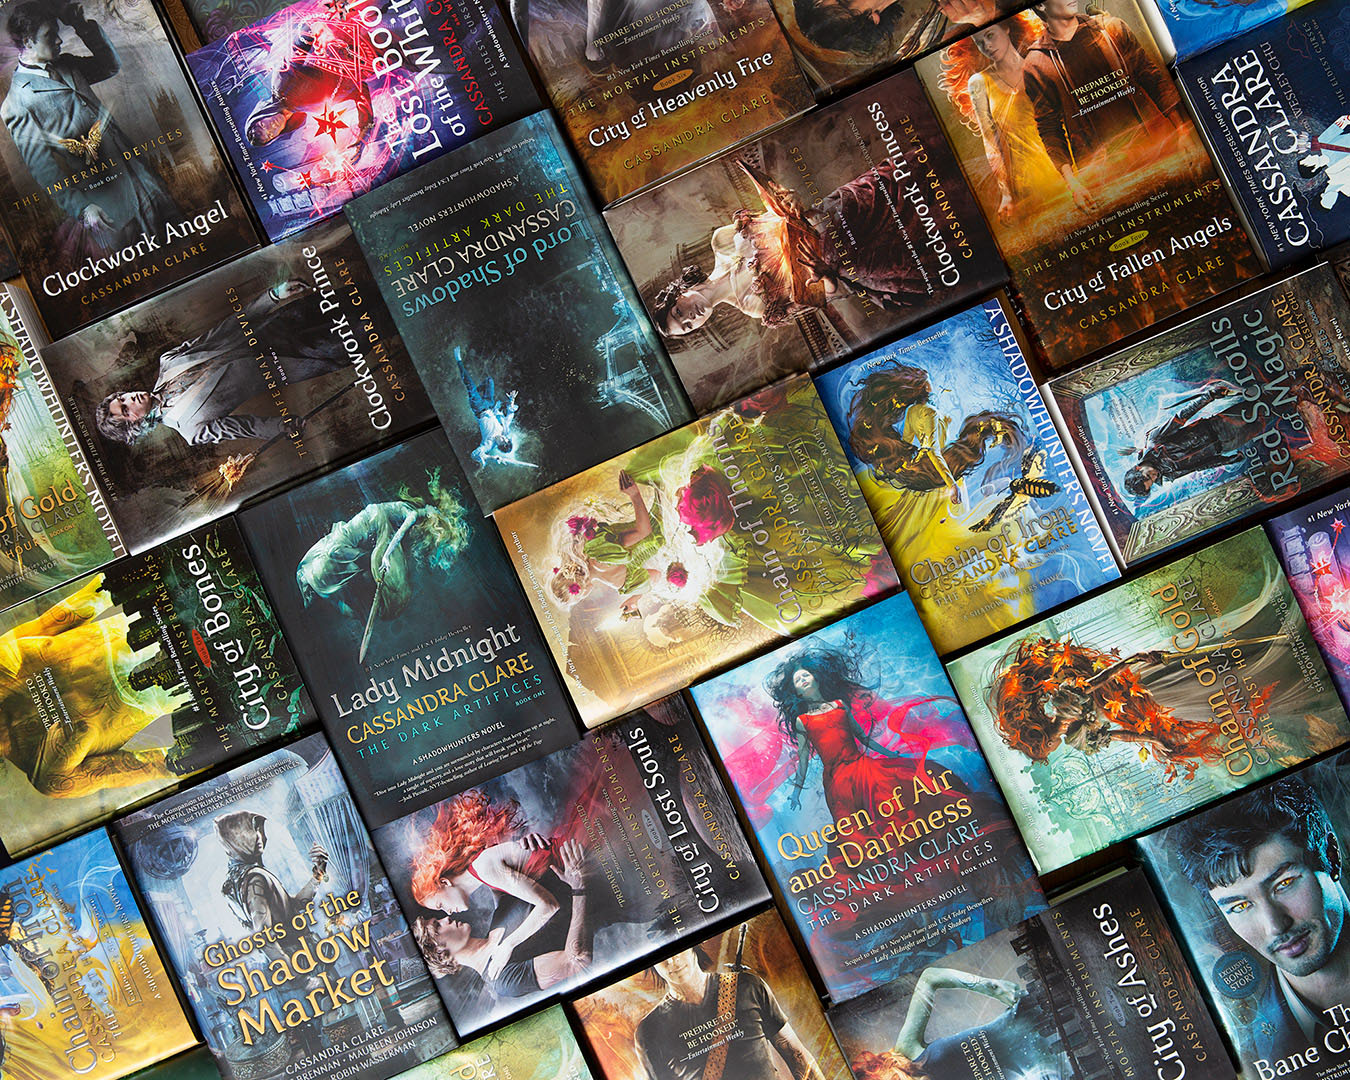 Cassandra Clare's Latest Book Temporarily De-Listed by